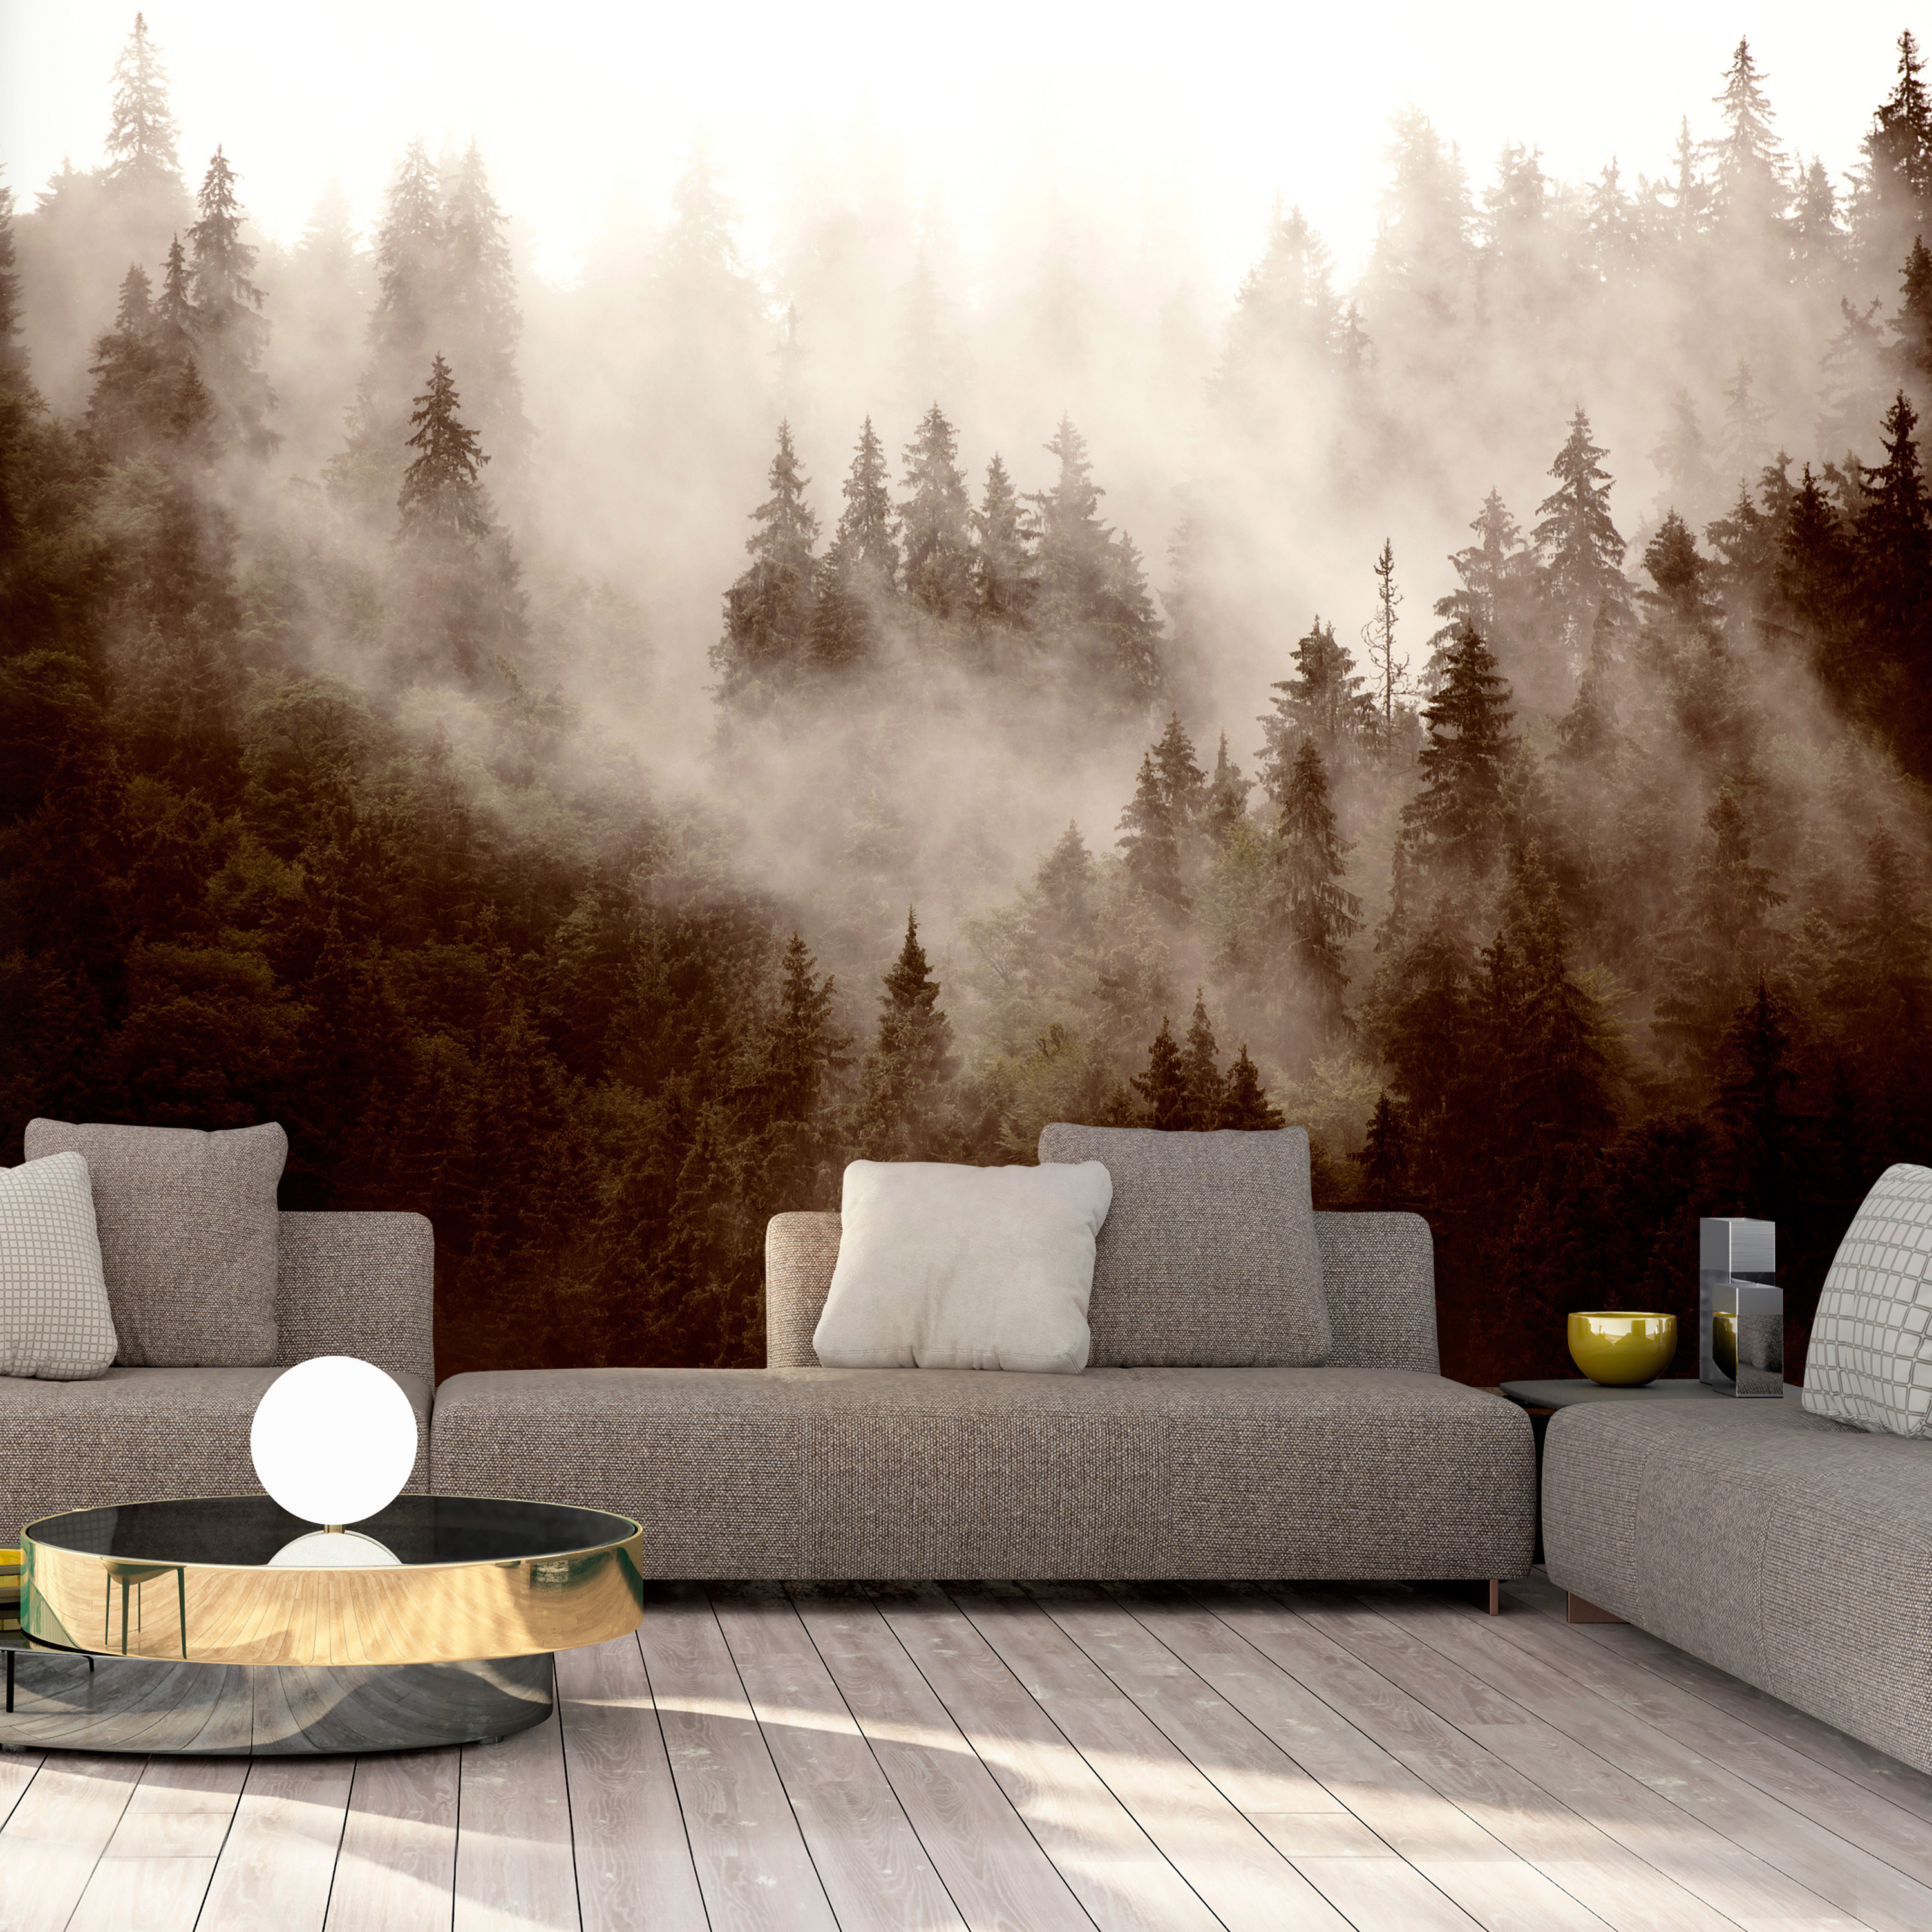 Self-adhesive Wallpaper - Mountain Forest (Sepia) - 294x210